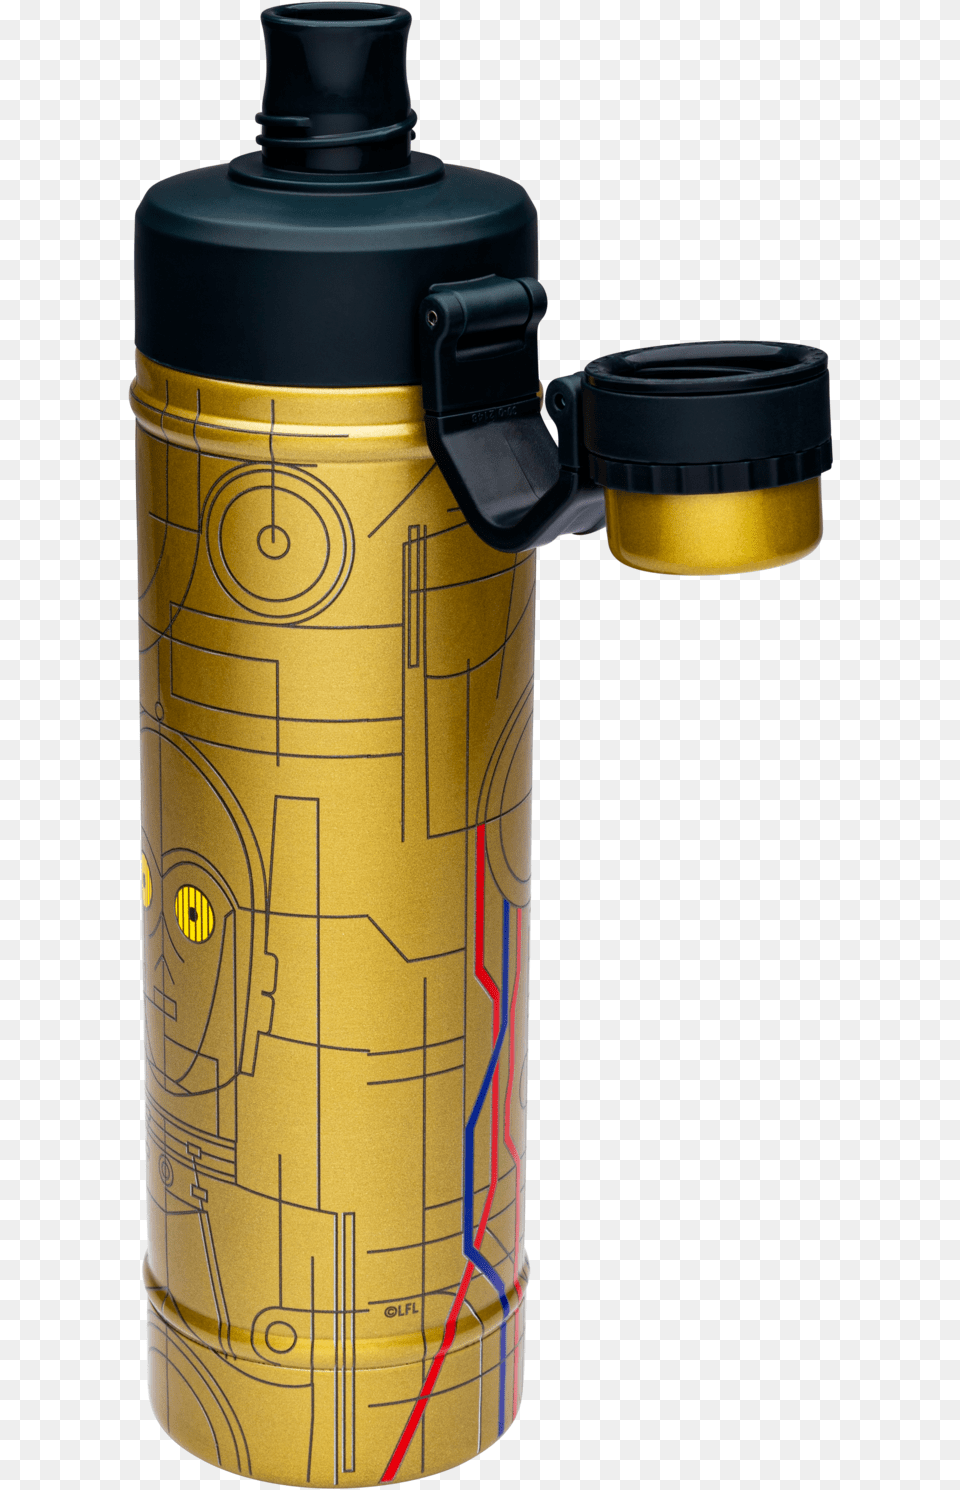 C 3po Water Bottle 25 Oz Cylinder, Cup, Shaker, Fire Hydrant, Hydrant Png